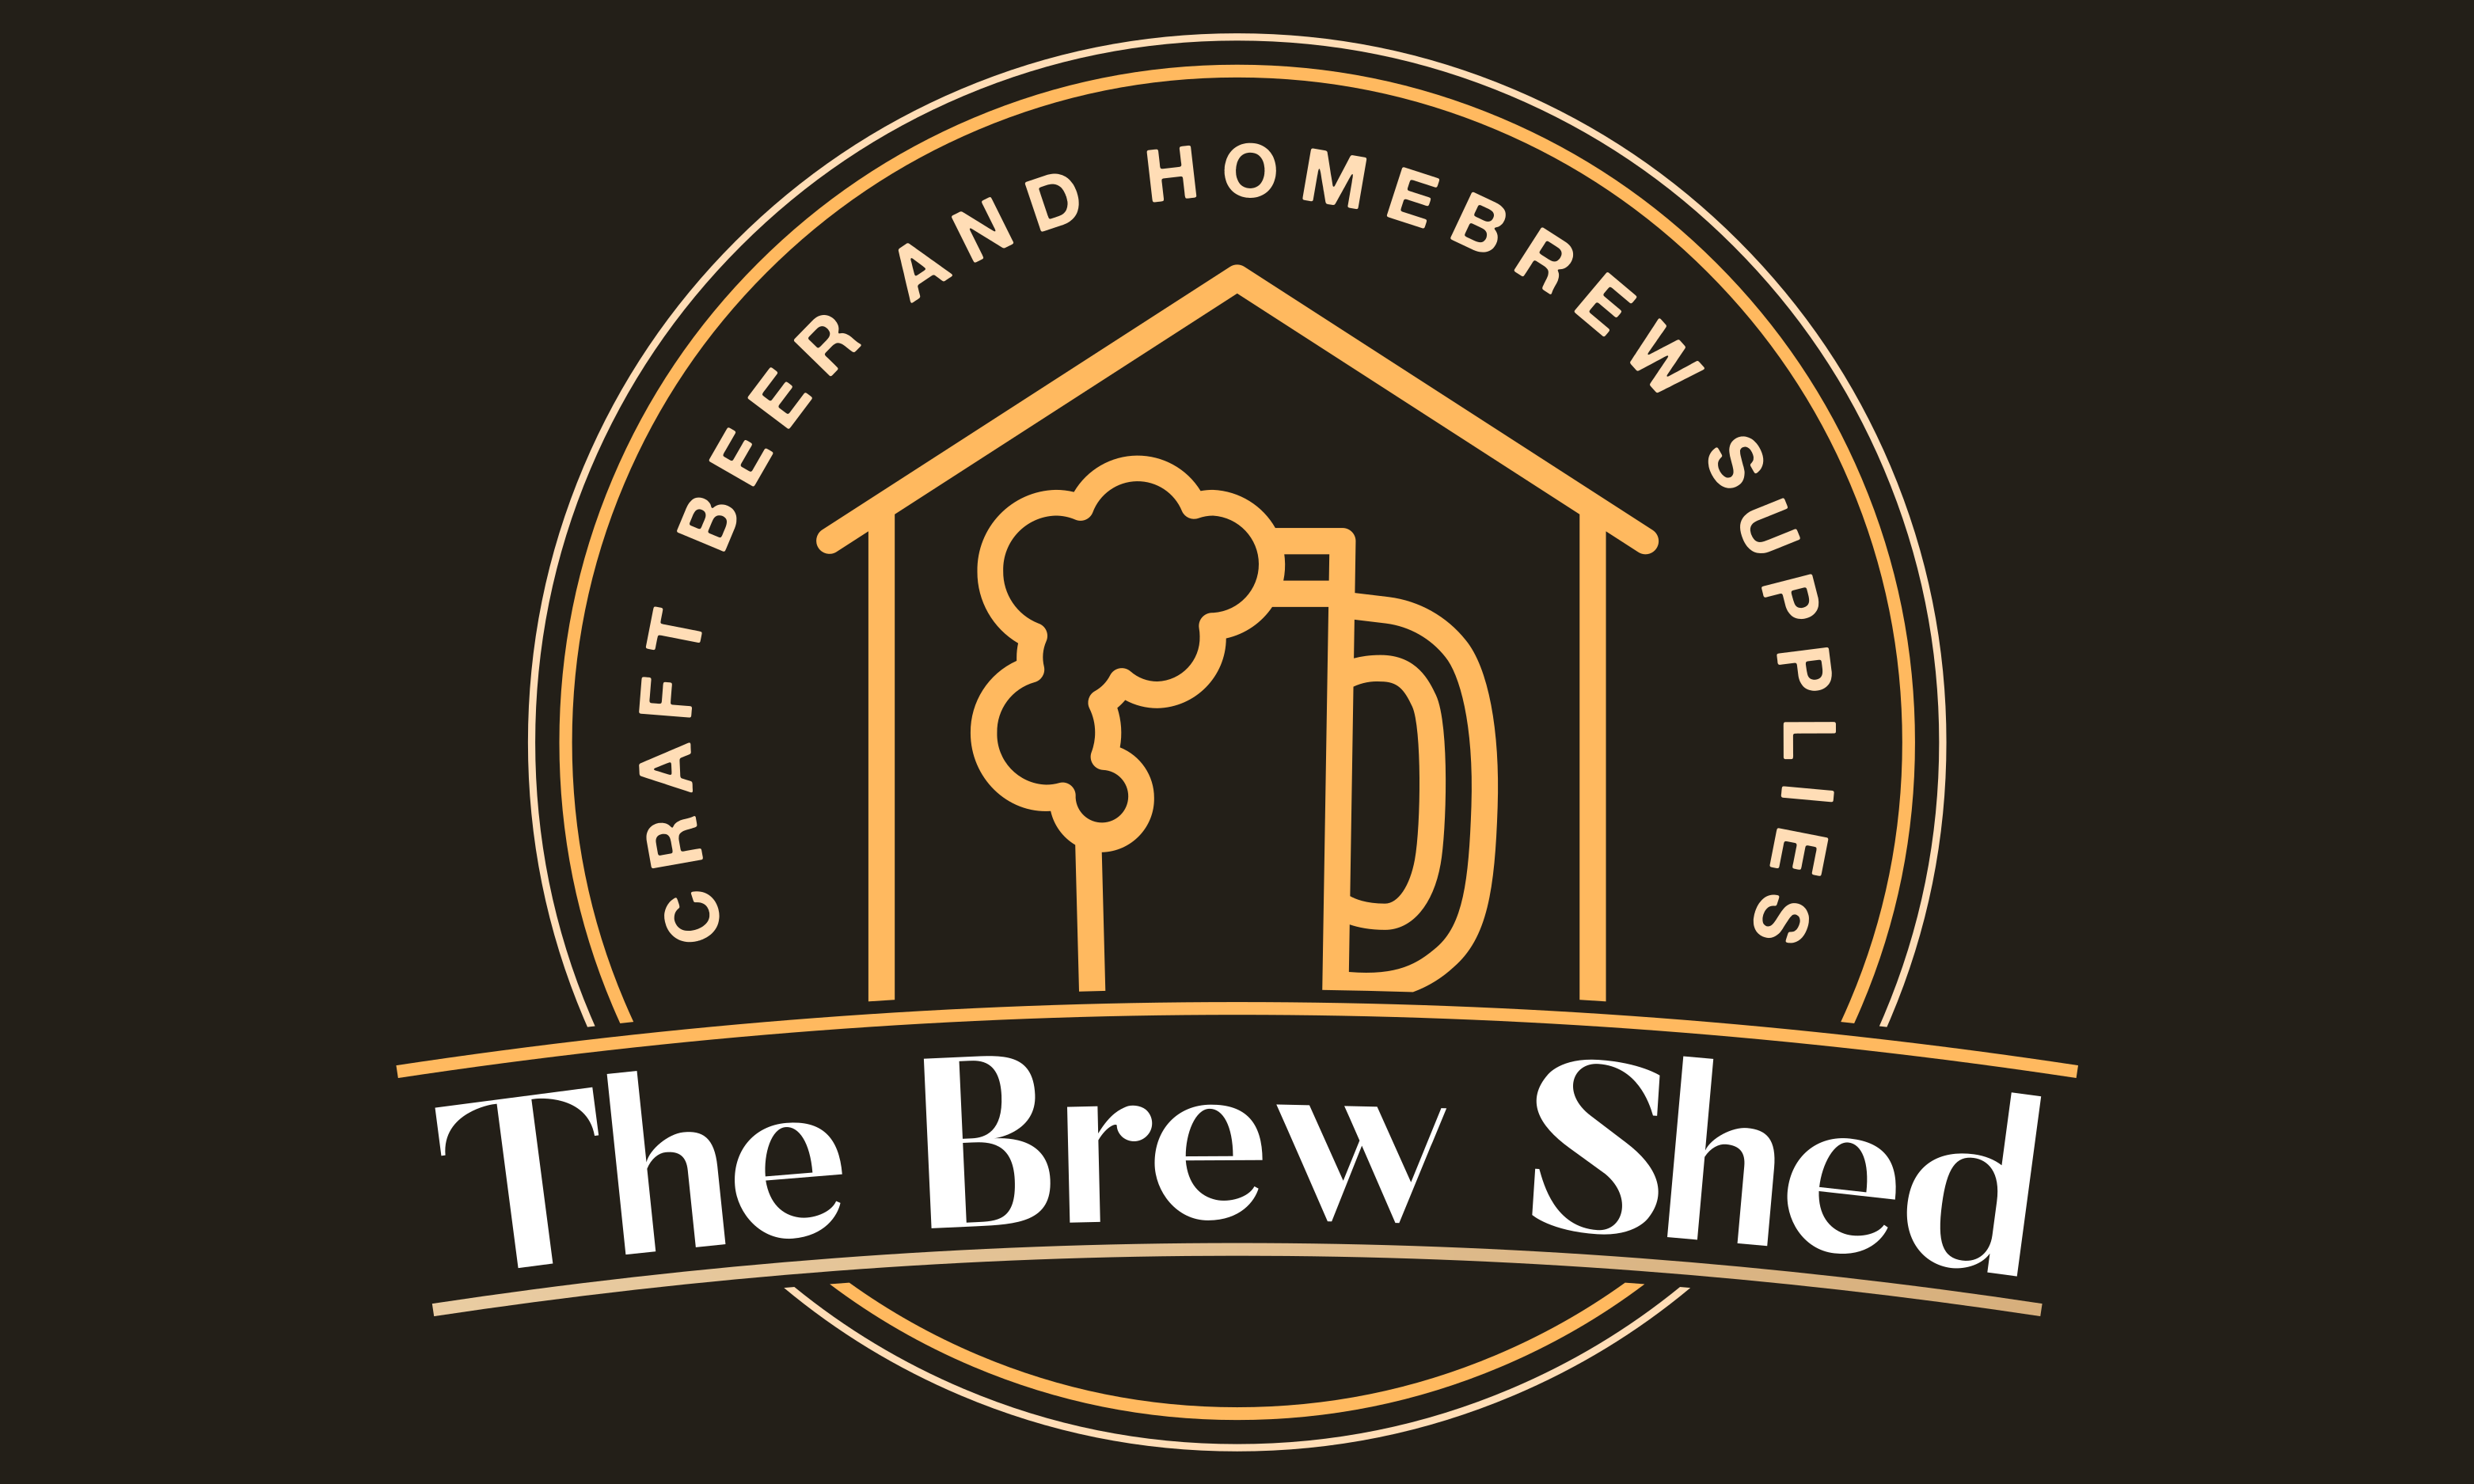 The Brew Shed